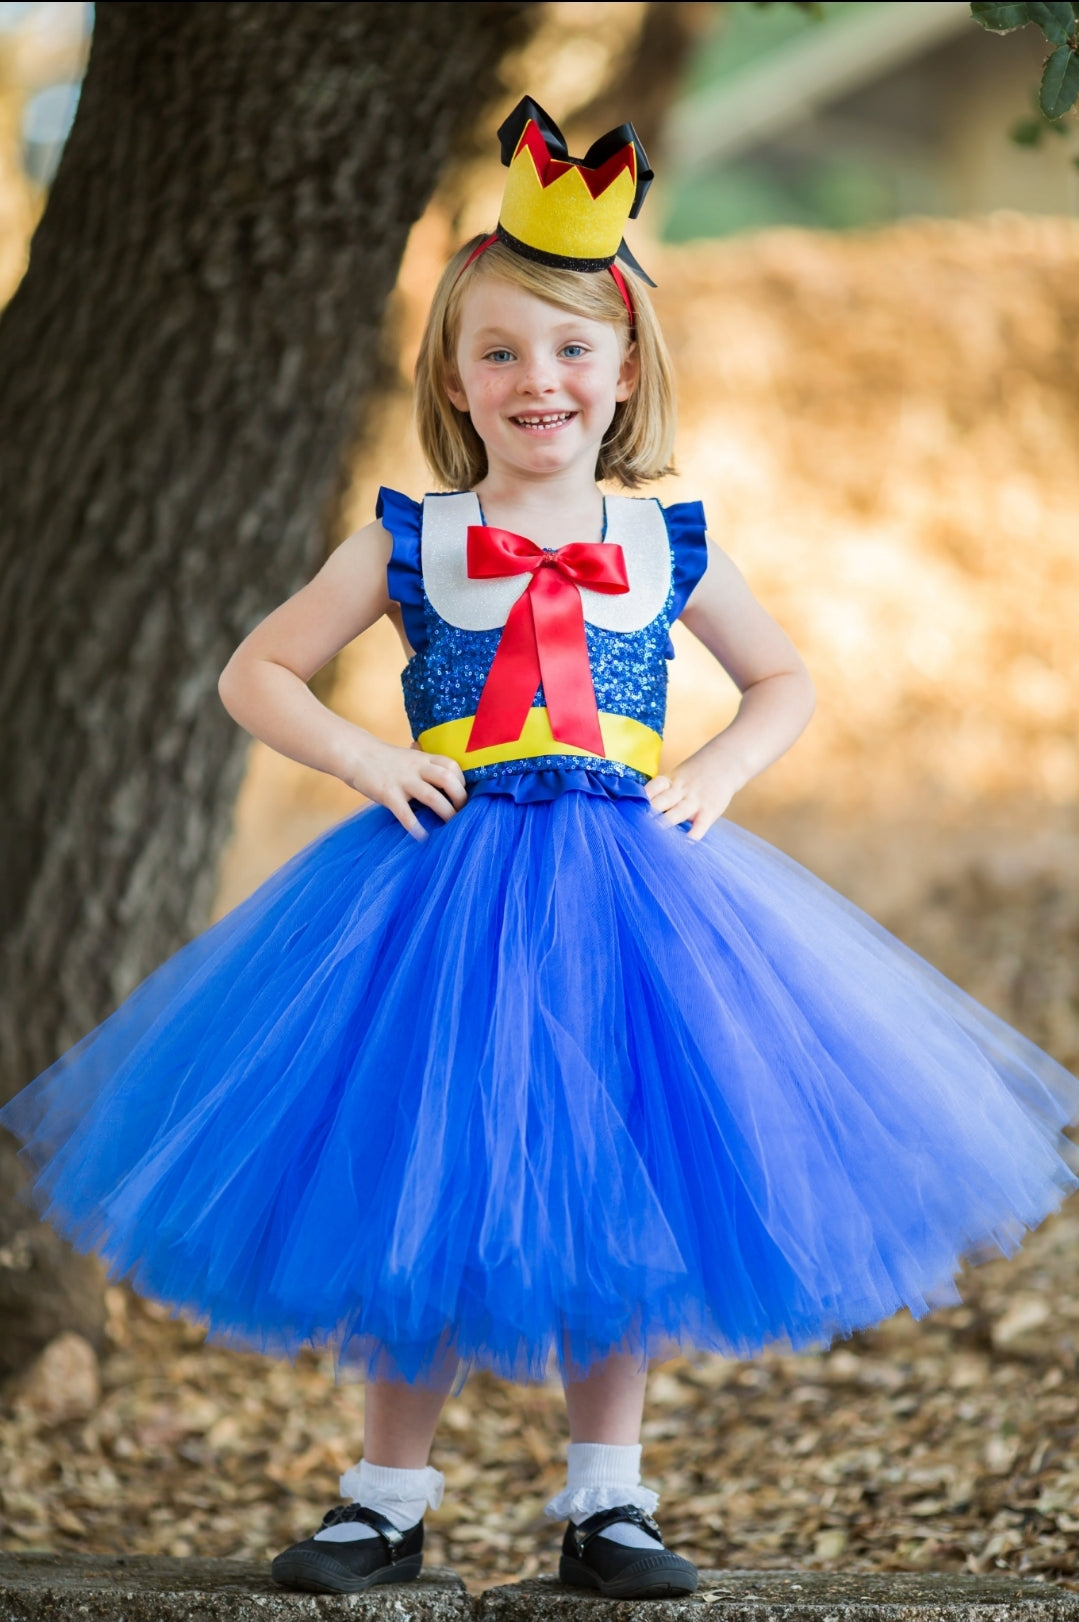 Halloween tutu costumes-Limited availability- DO NOT PURCHASE WITHOUT APPROVAL